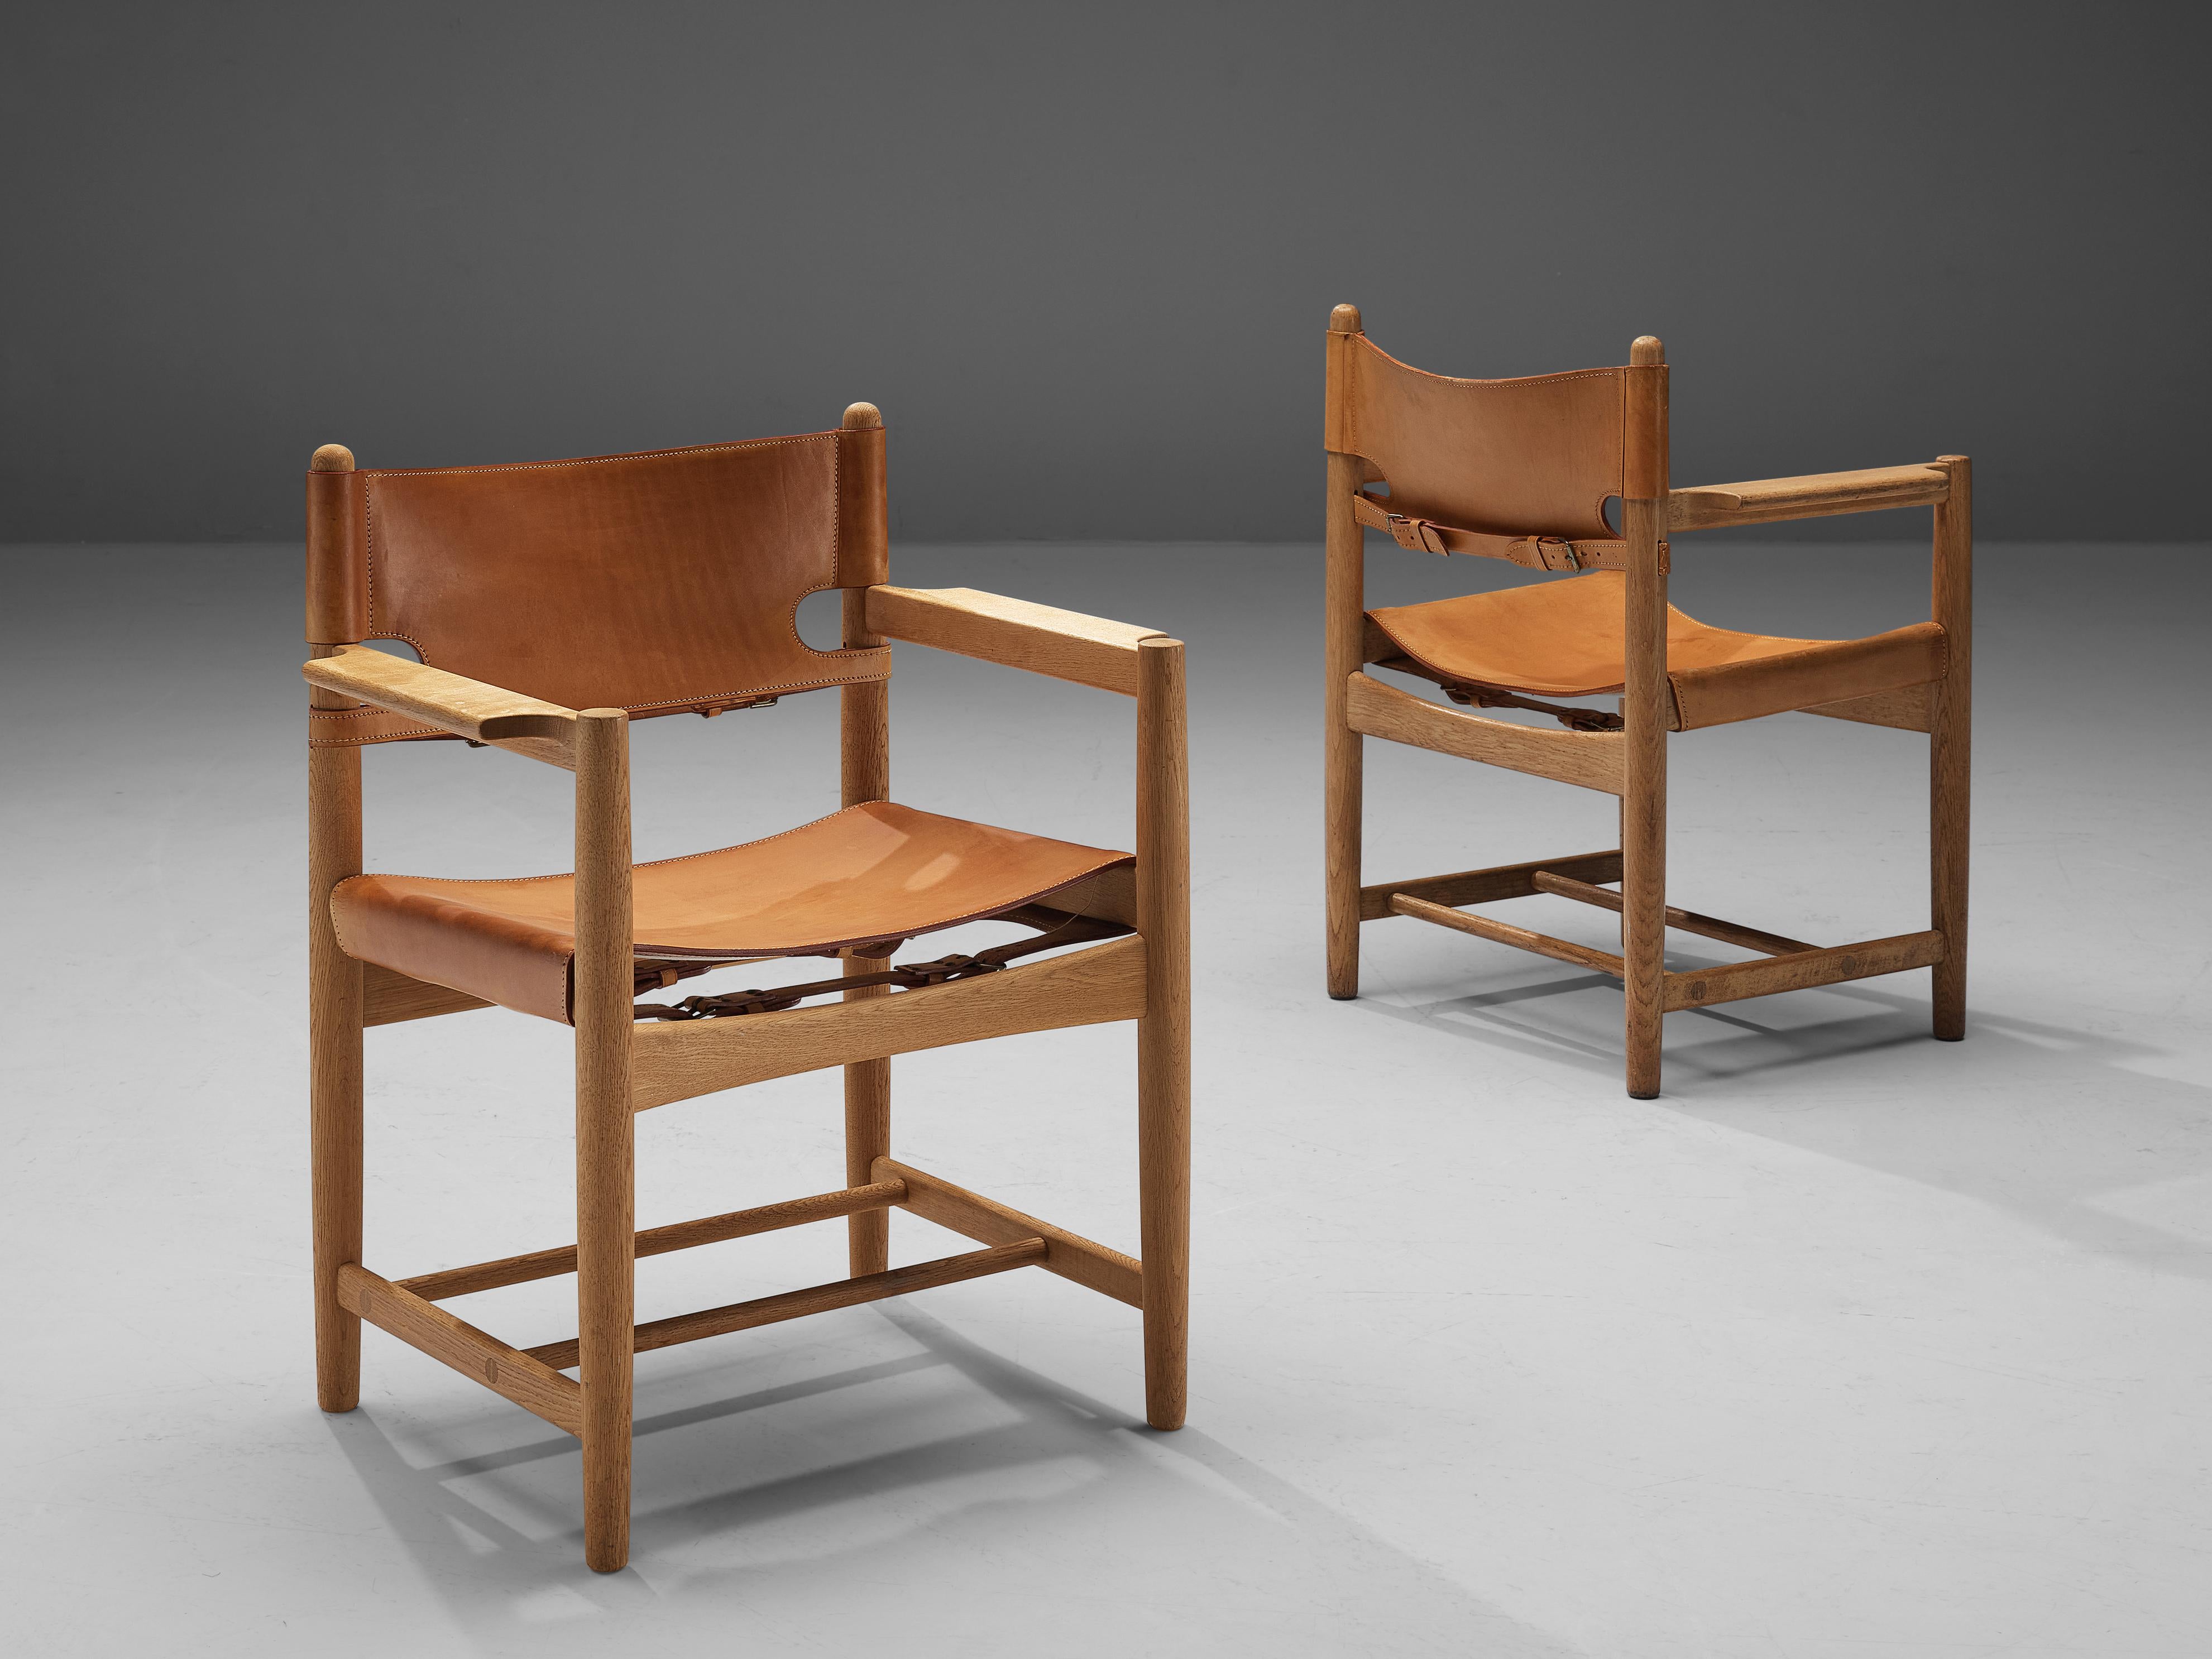 Børge Mogensen for Fredericia Stolefabrik, pair of armchairs model 3237, oak, leather, Denmark, 1964.

This pair of armchairs reminds of the classical foldable 'director-chairs', yet this design by Danish designer Børge Mogensen (1914-1972) is